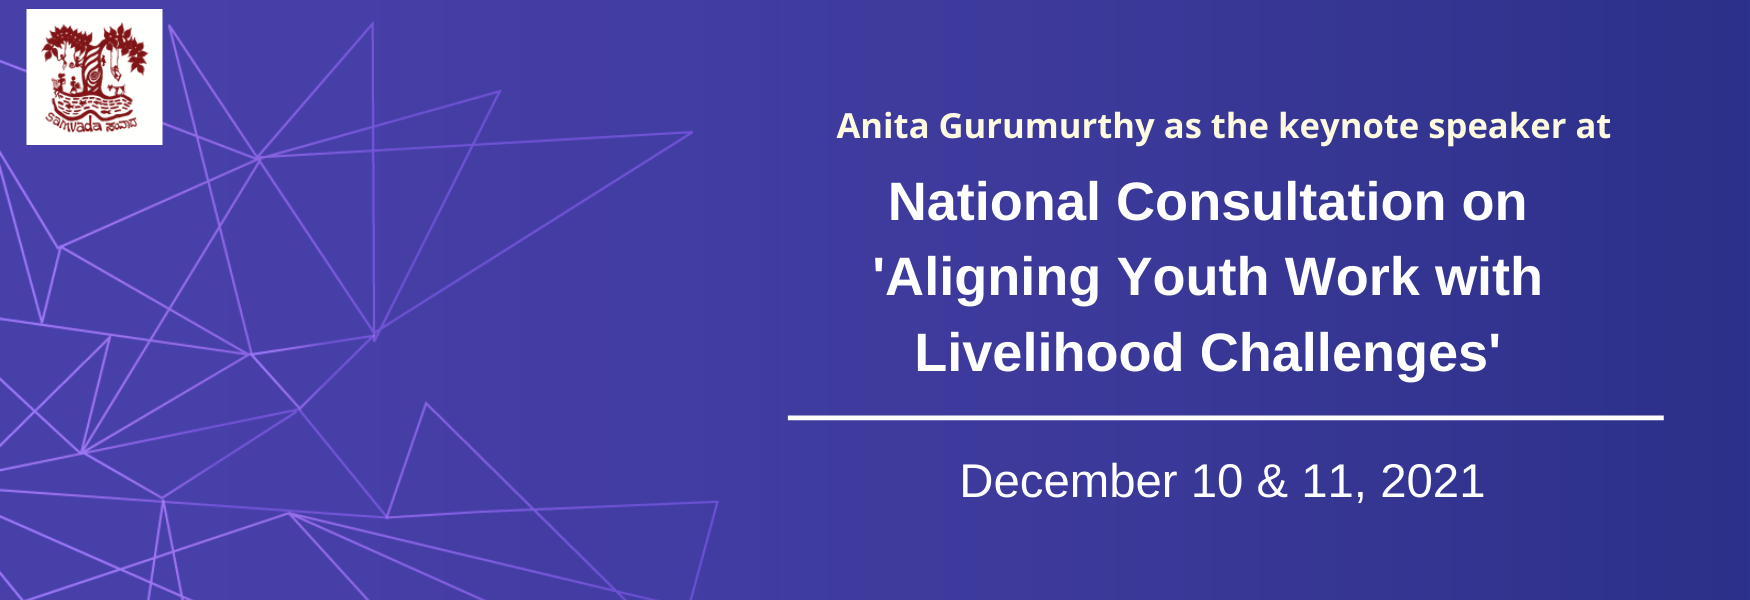 national consultation on 'Aligning youth work with livelihood challenges'